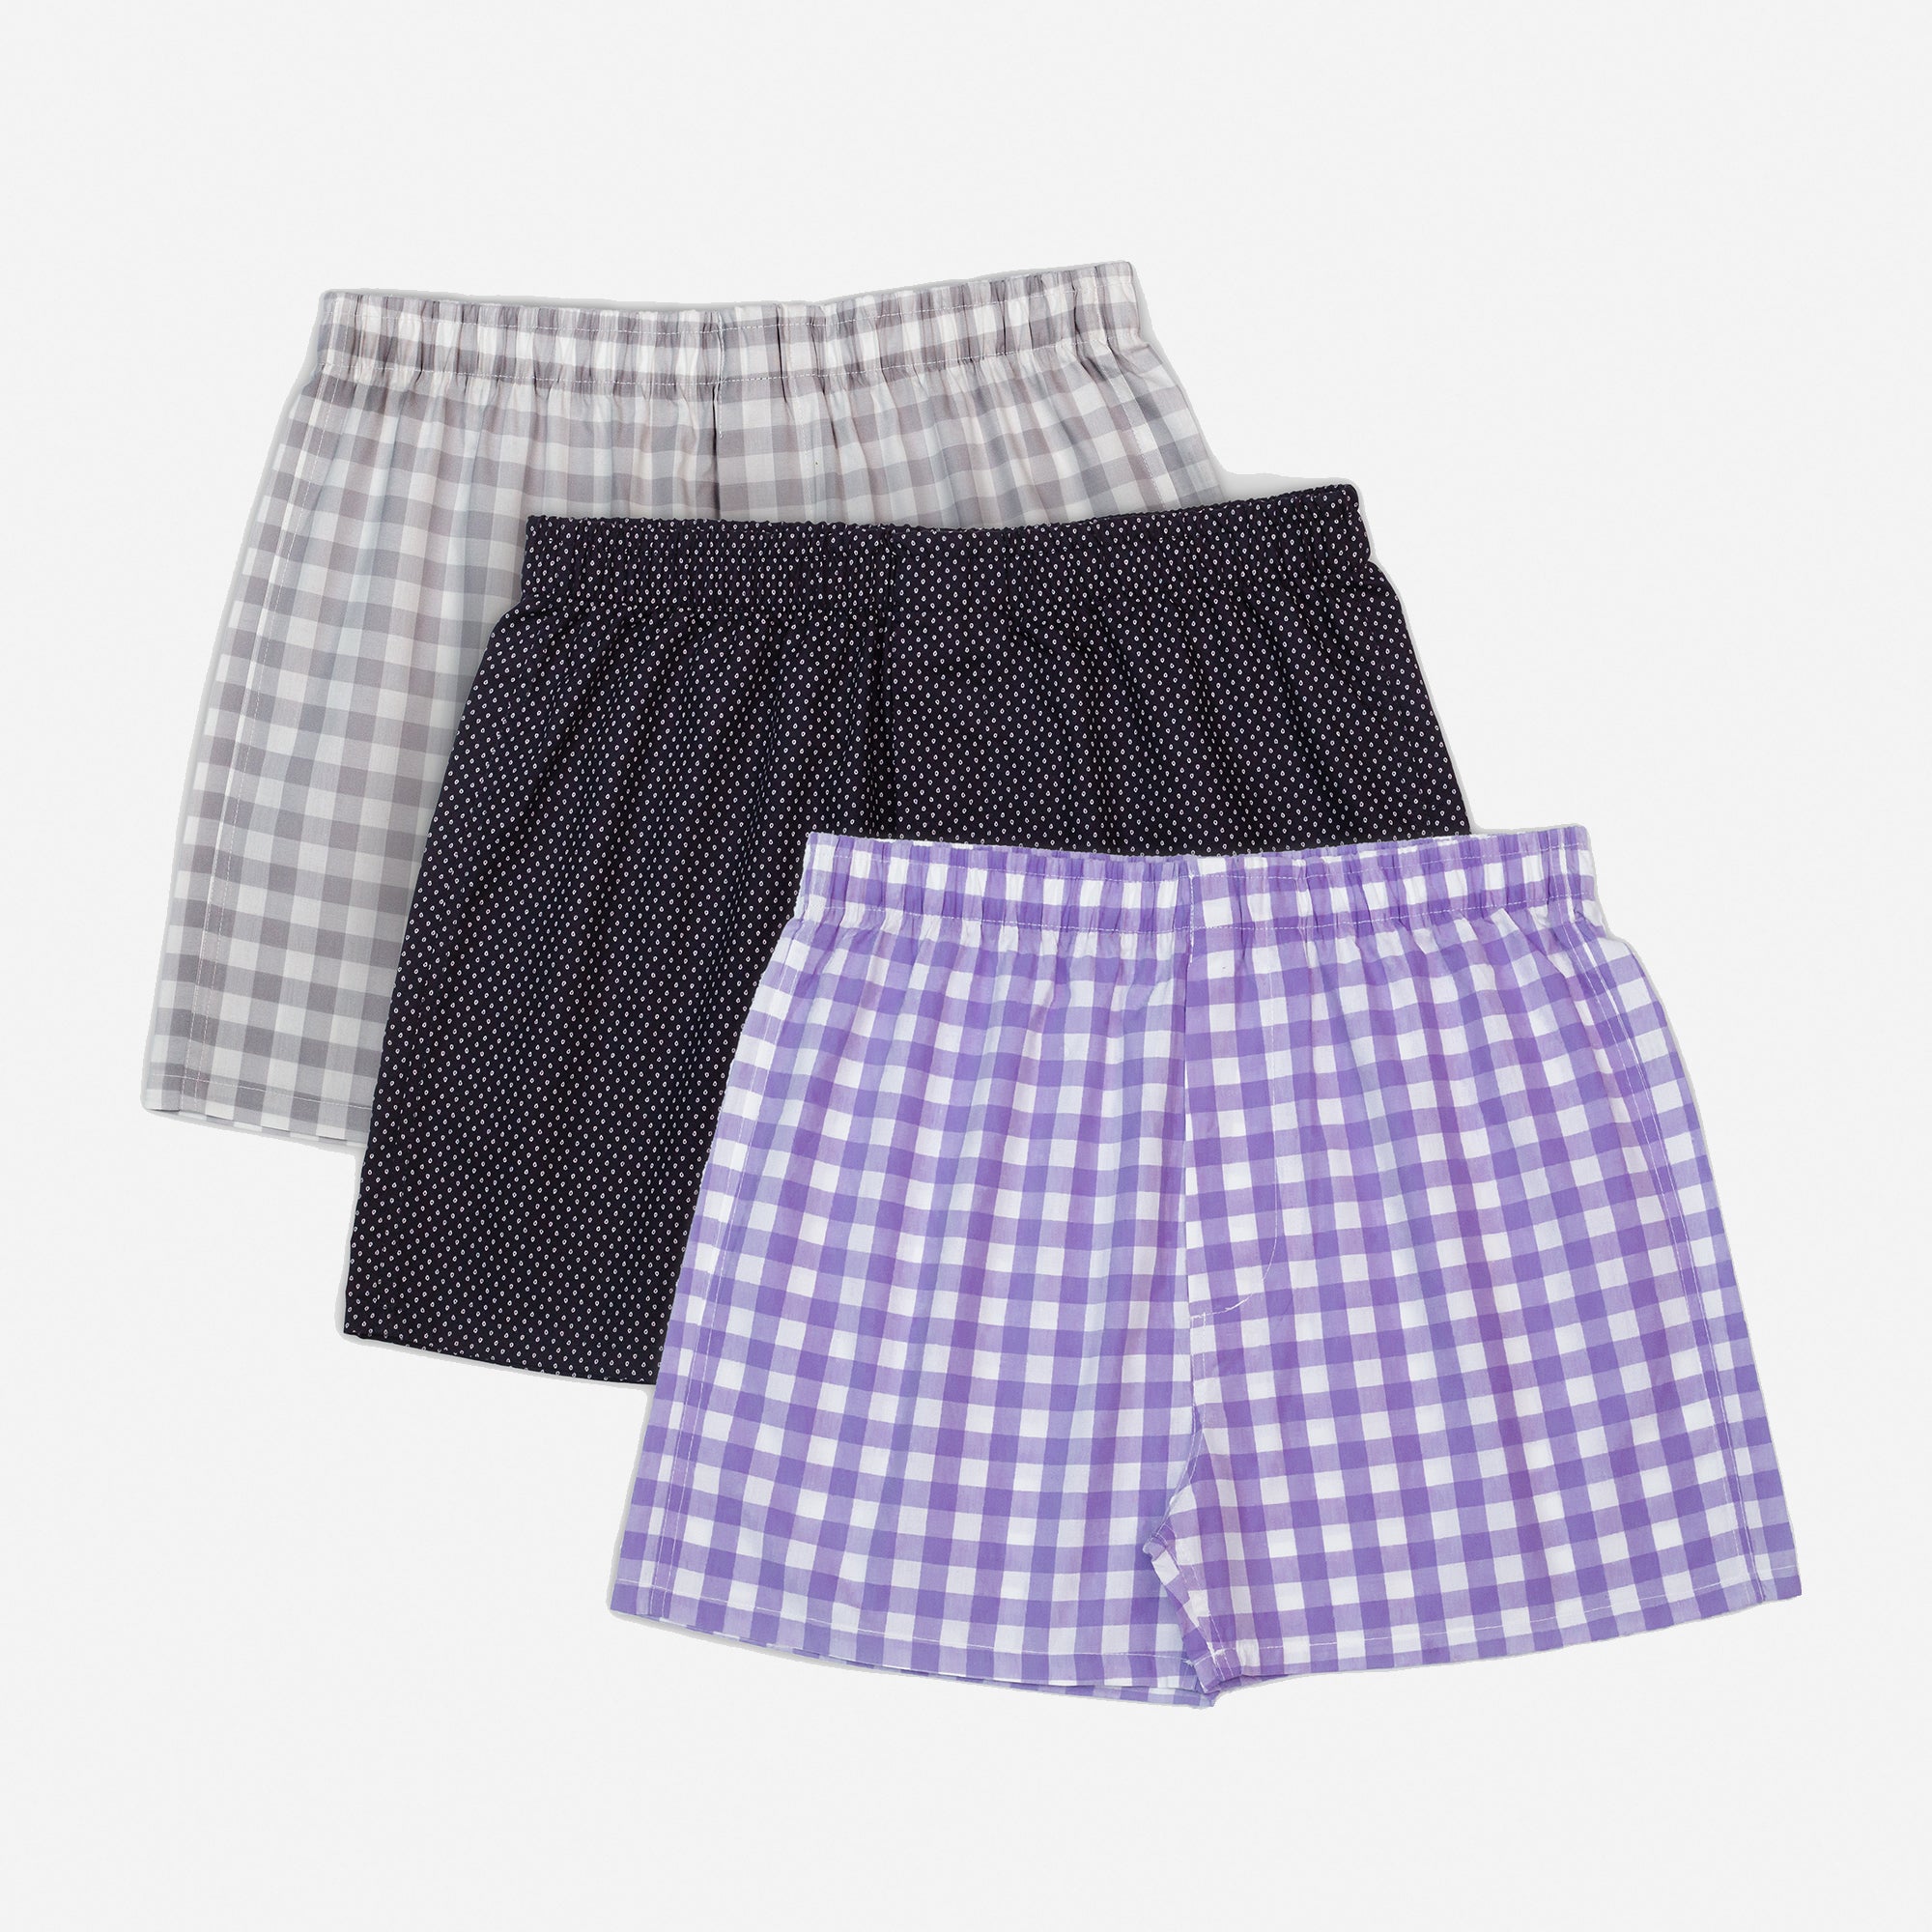 Men's 100% Cotton Boxer Shorts Waistband Check Print Boxers - Pack of 3